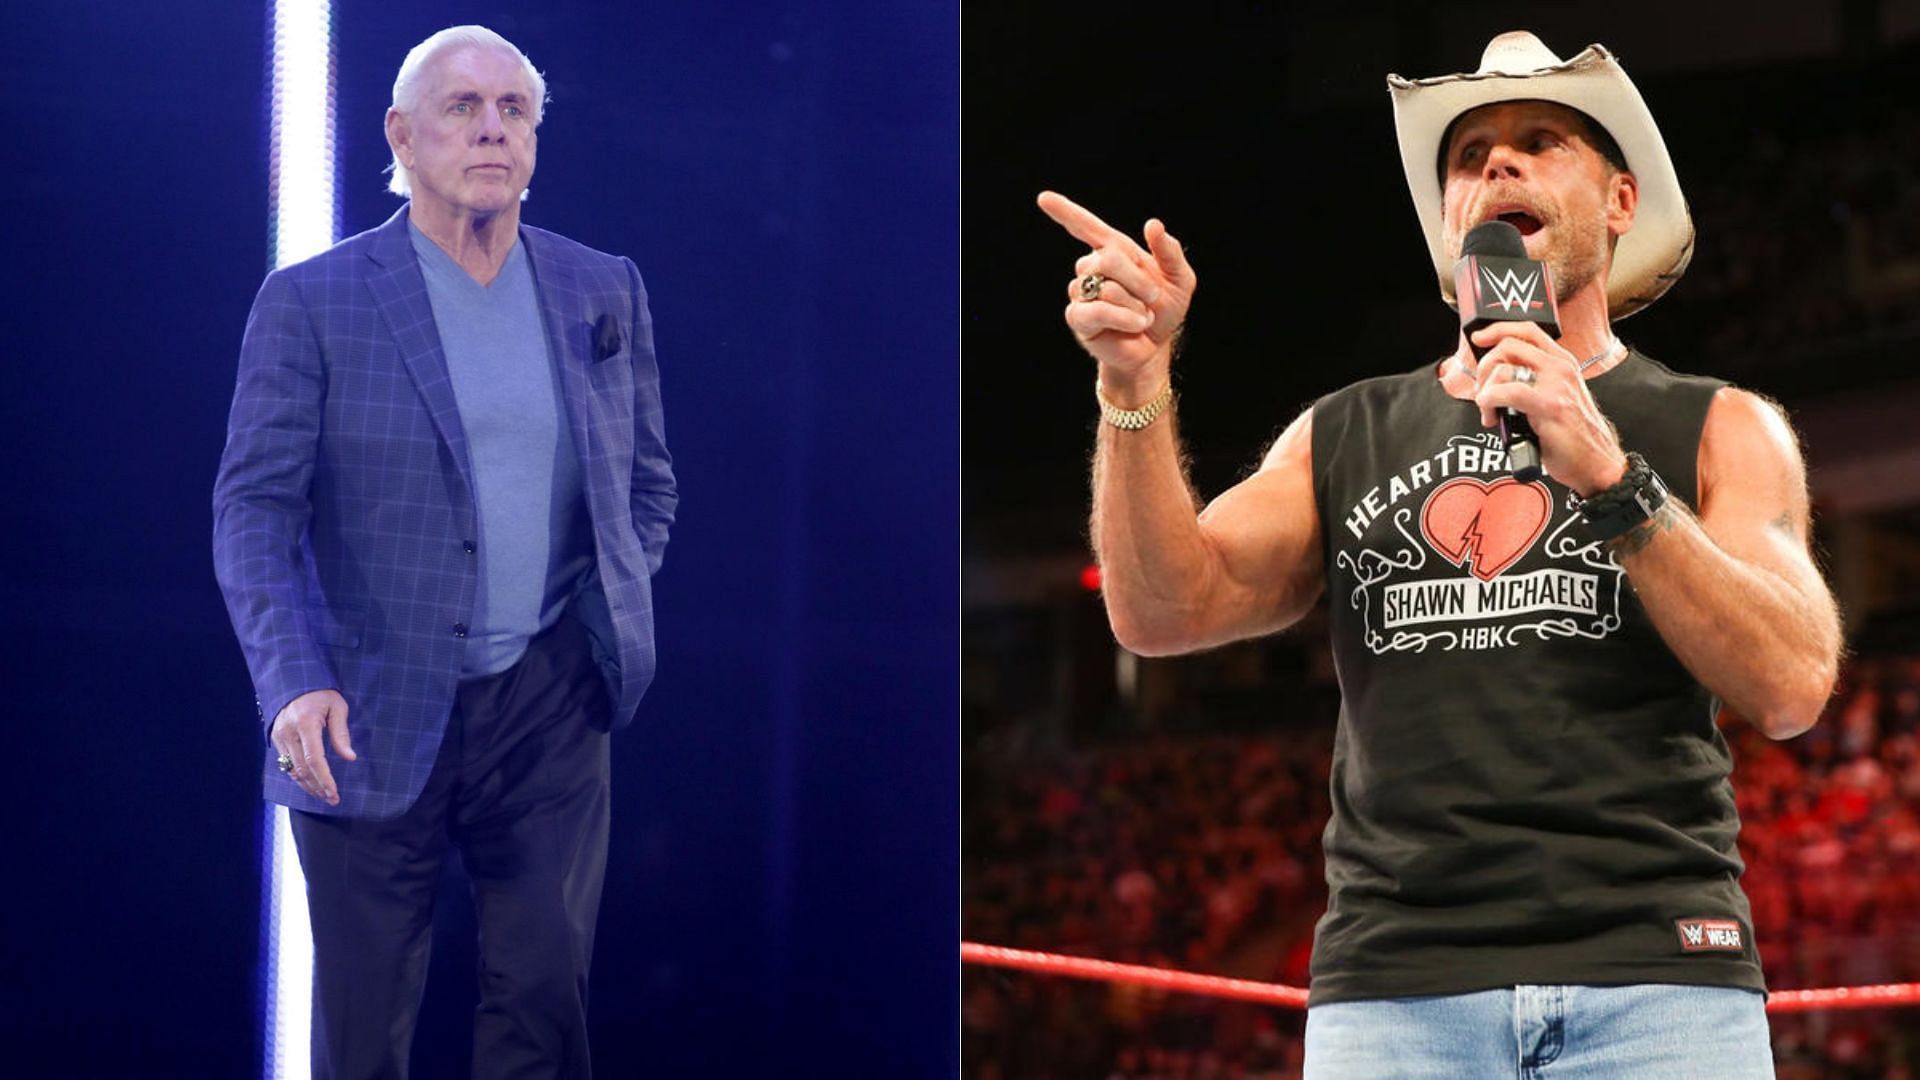 Ric Flair (left); Shawn Michaels (right)